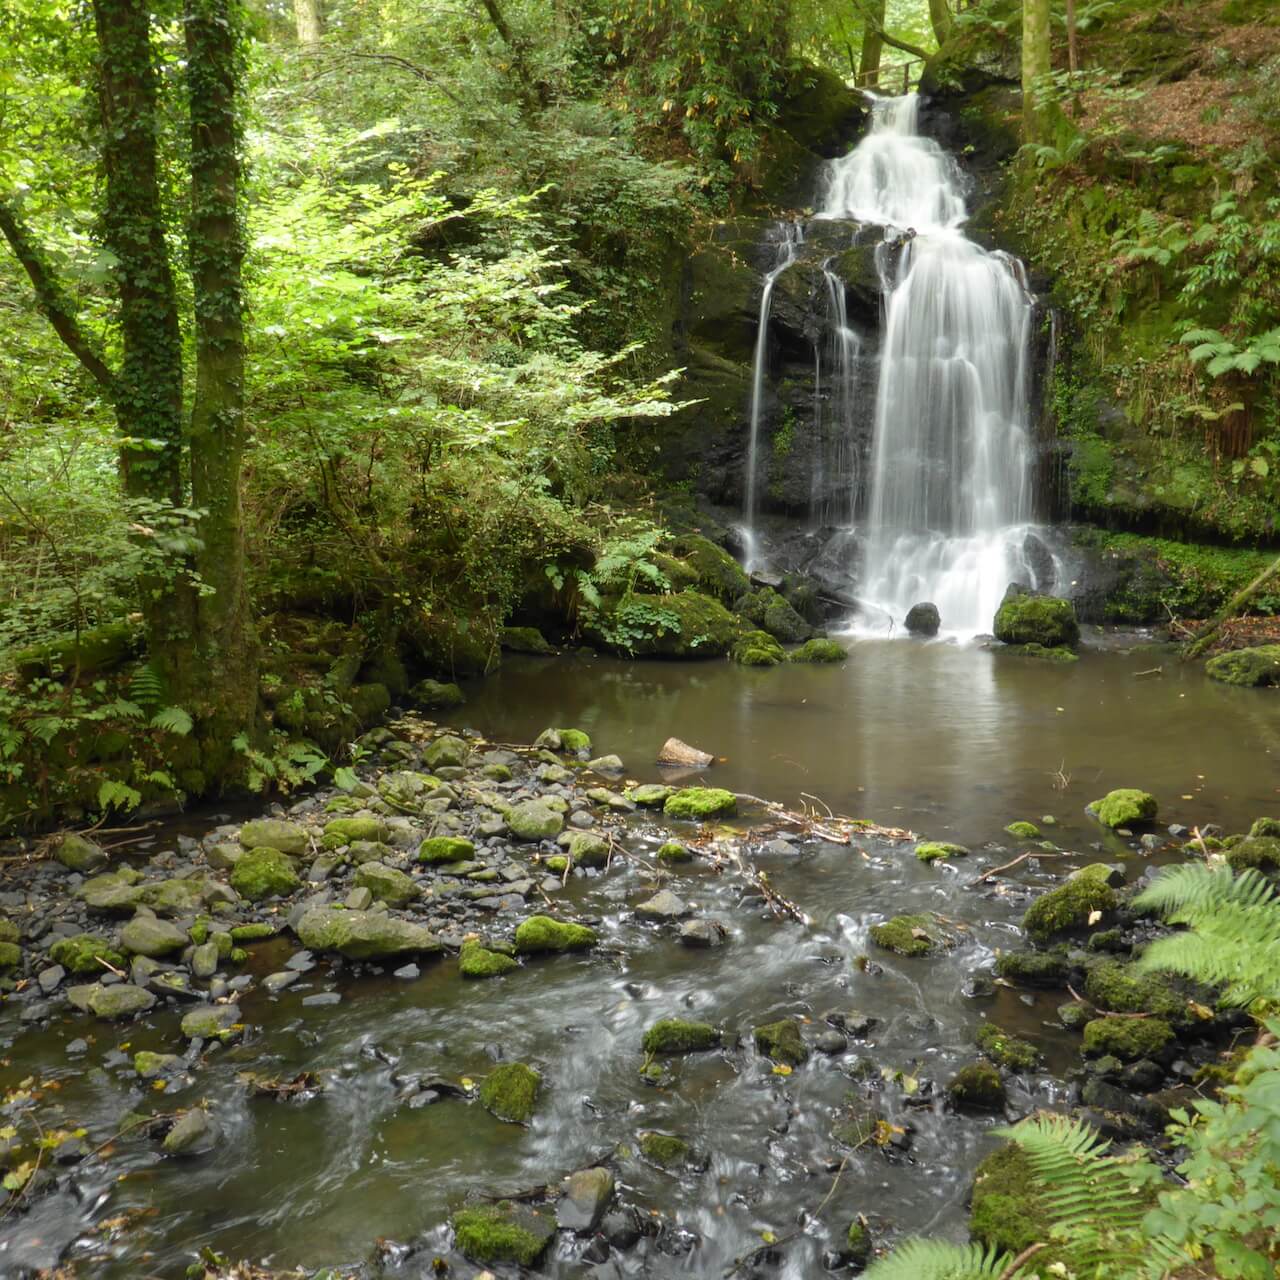 Waterfall at Finlaystone Country Park